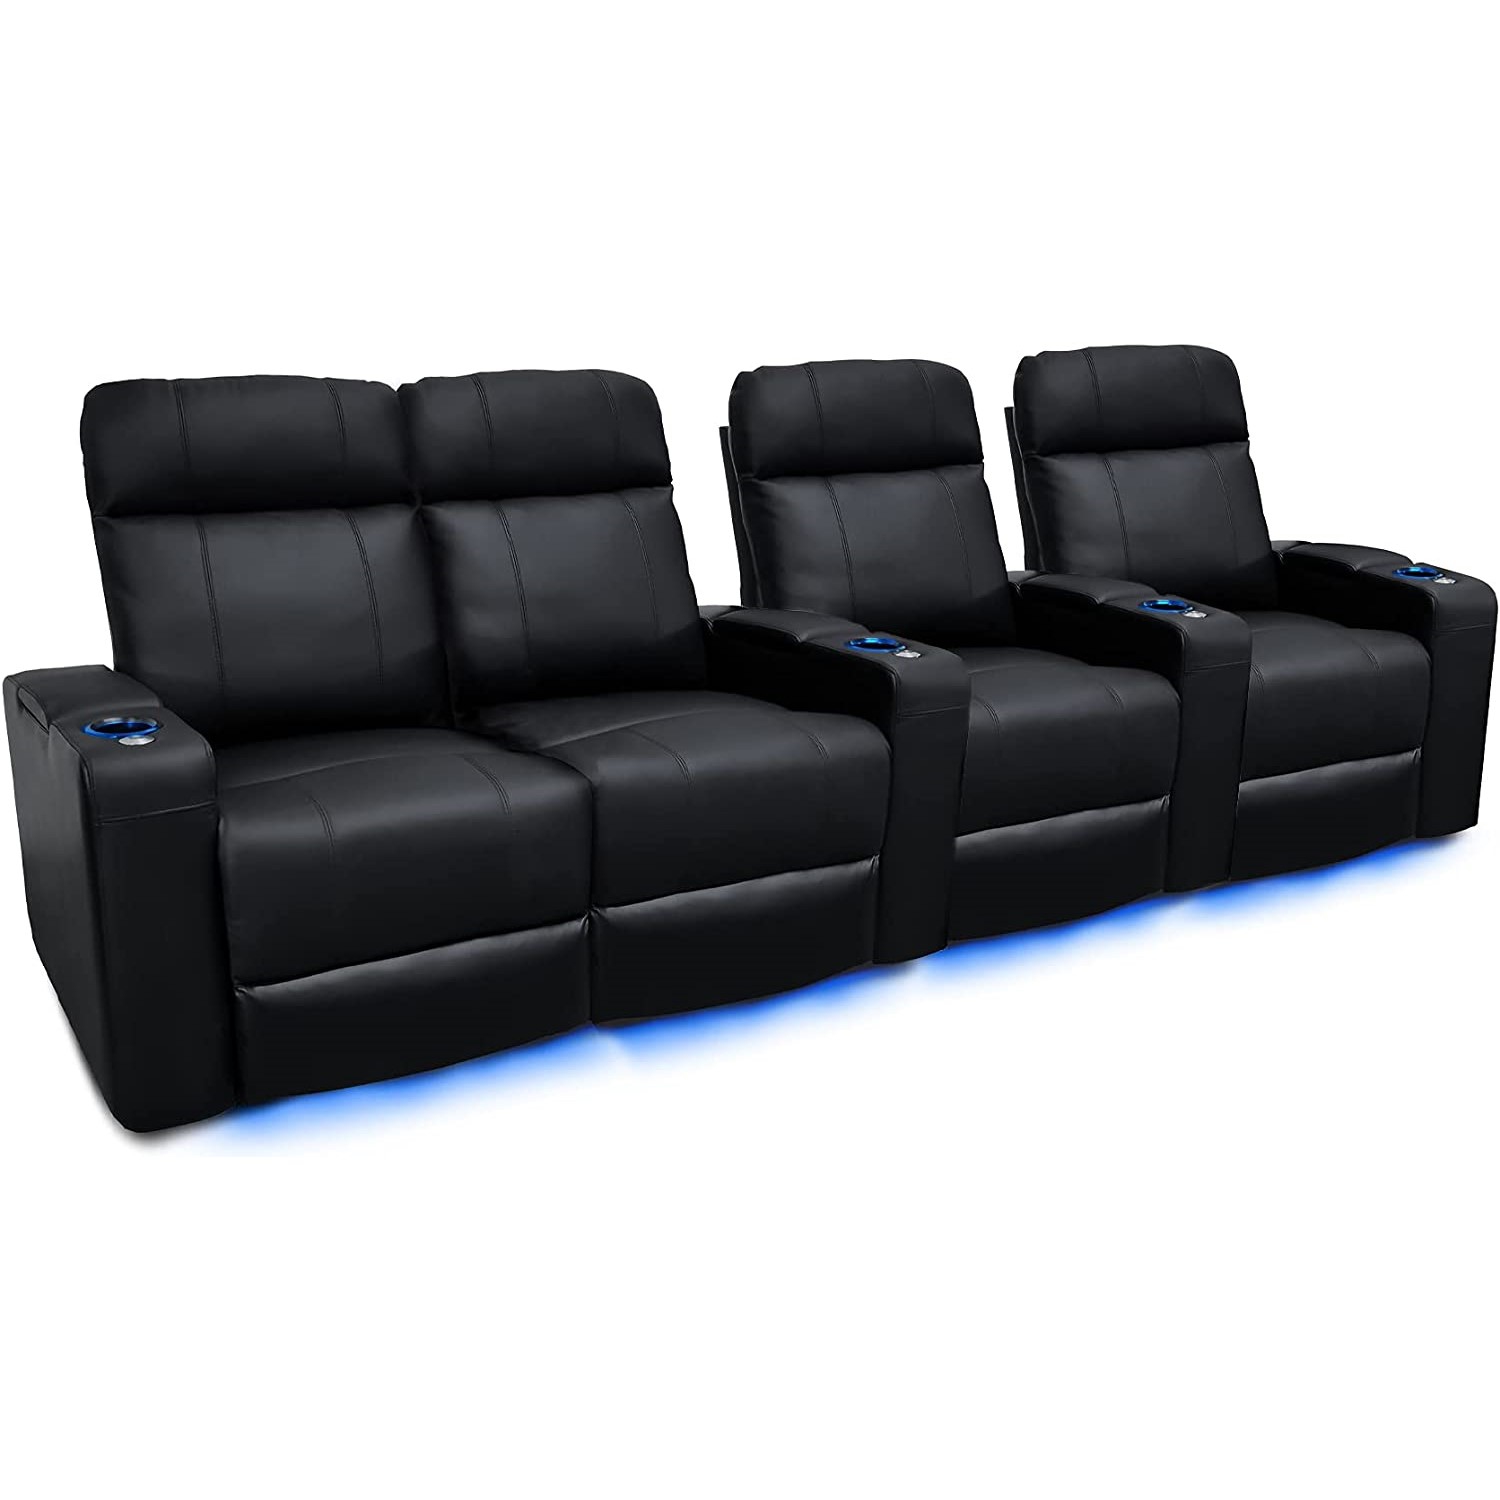 Valencia Piacenza Home Theater Seating | Premium Top Grain Nappa 9000 Leather, Power Recliner, LED Lighting (Row of 4 Loveseat Left, Black)